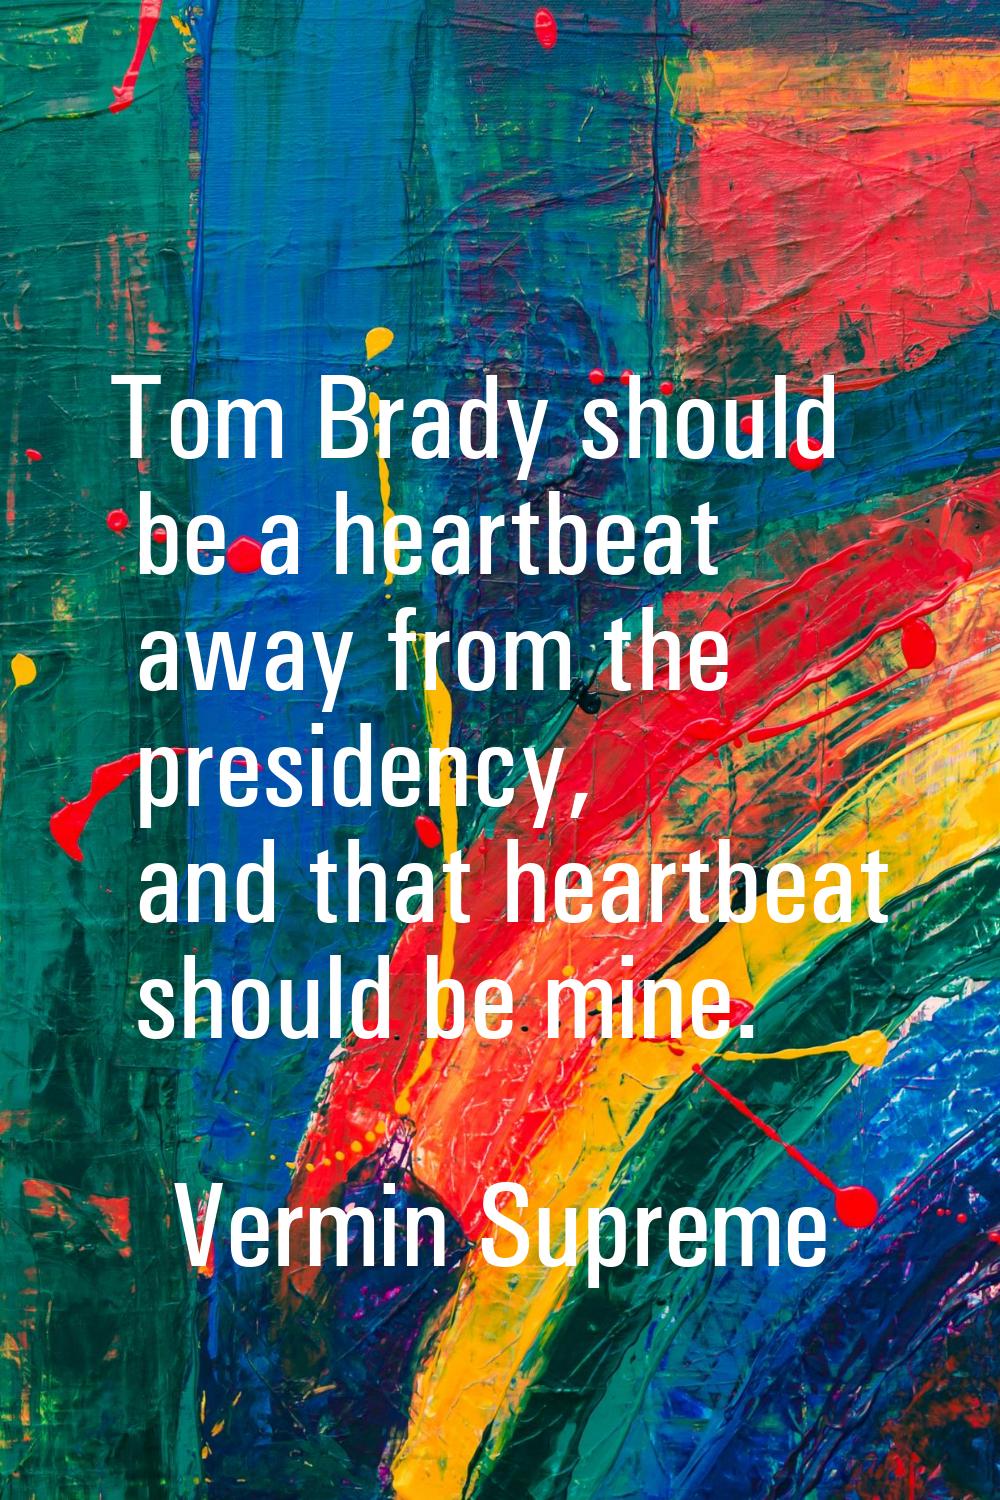 Tom Brady should be a heartbeat away from the presidency, and that heartbeat should be mine.